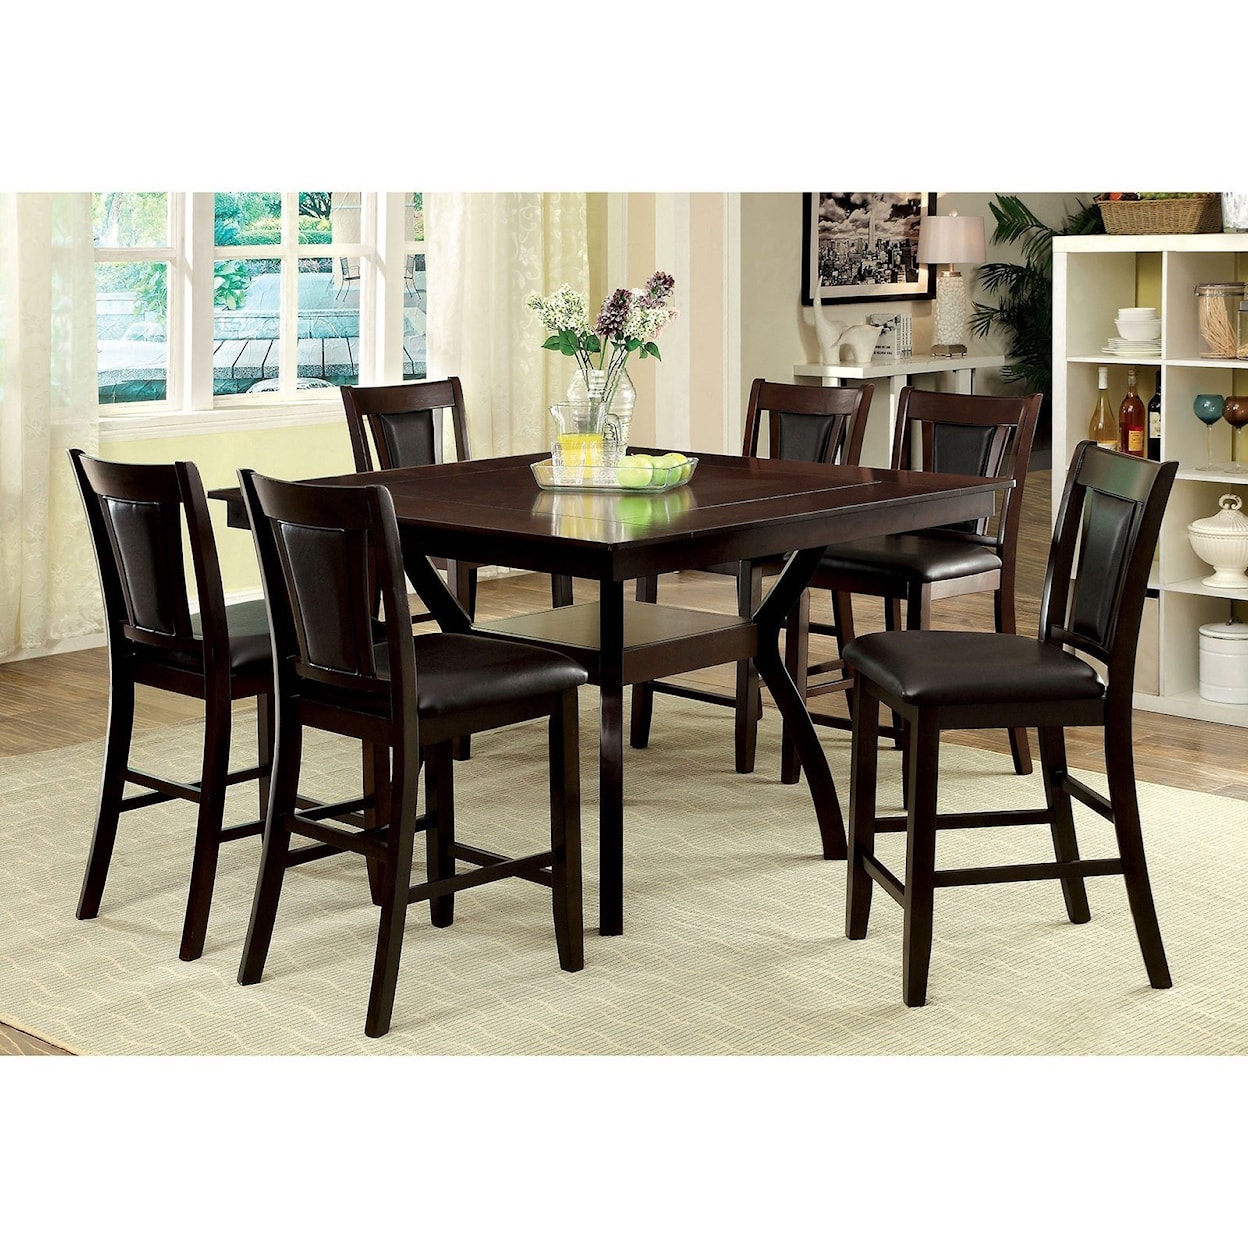 FUSA Brent 7 Pc Counter Height Dining Set